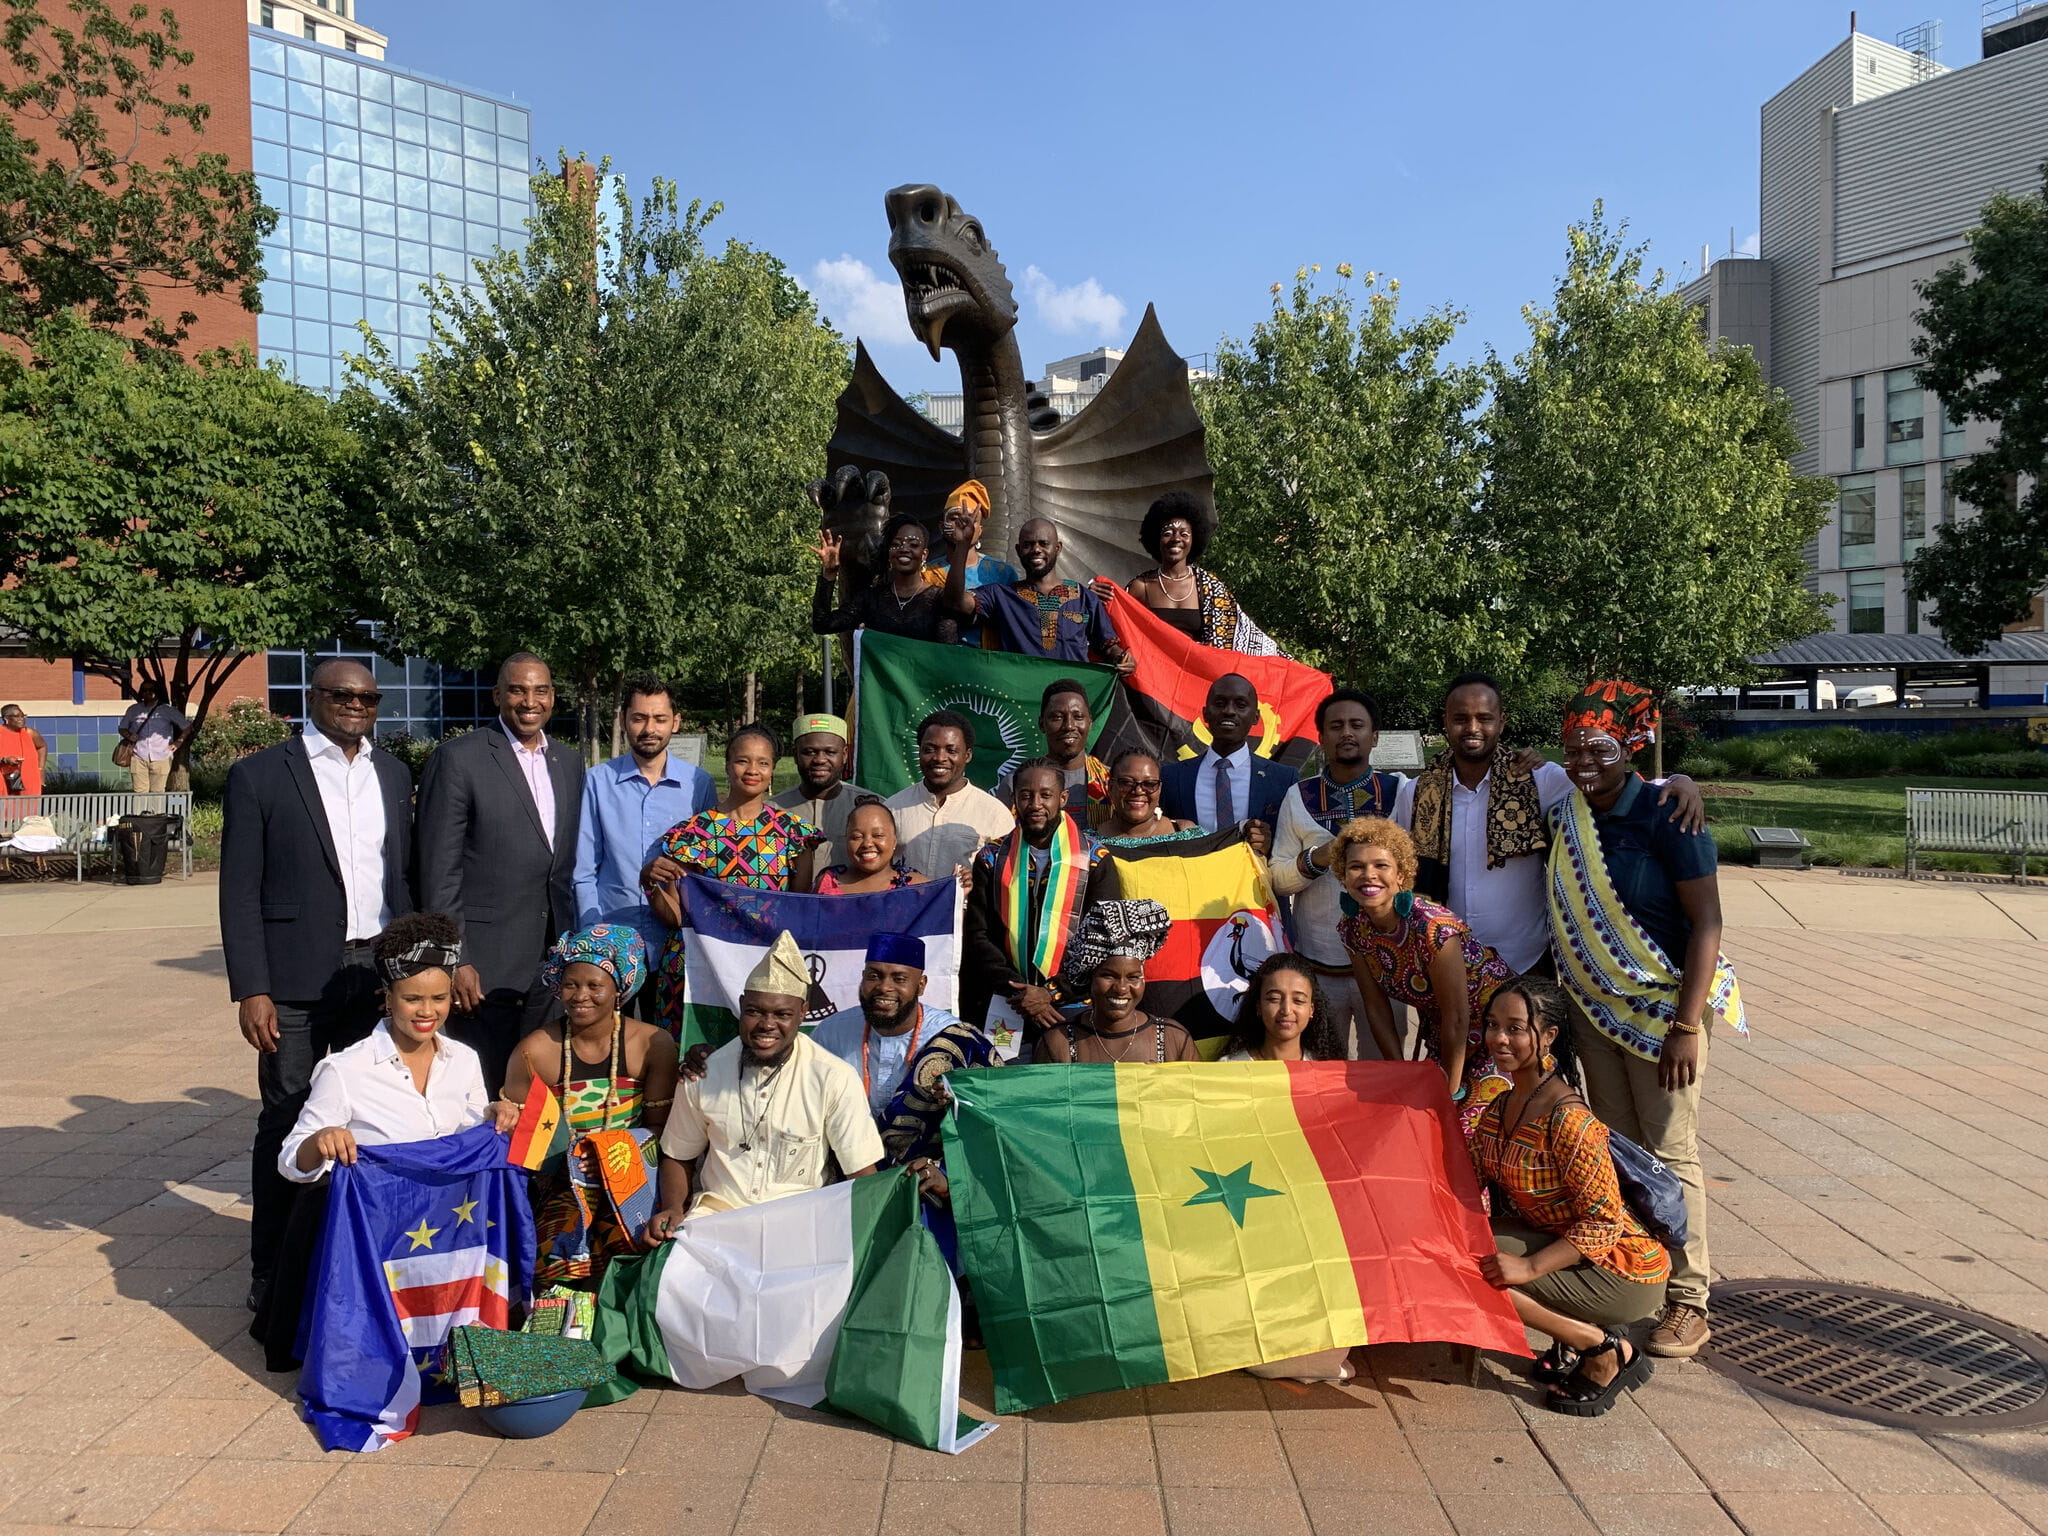 Two rows of people standing in front of the dragon statue on Drexel's campus holding flags of their home African countries.